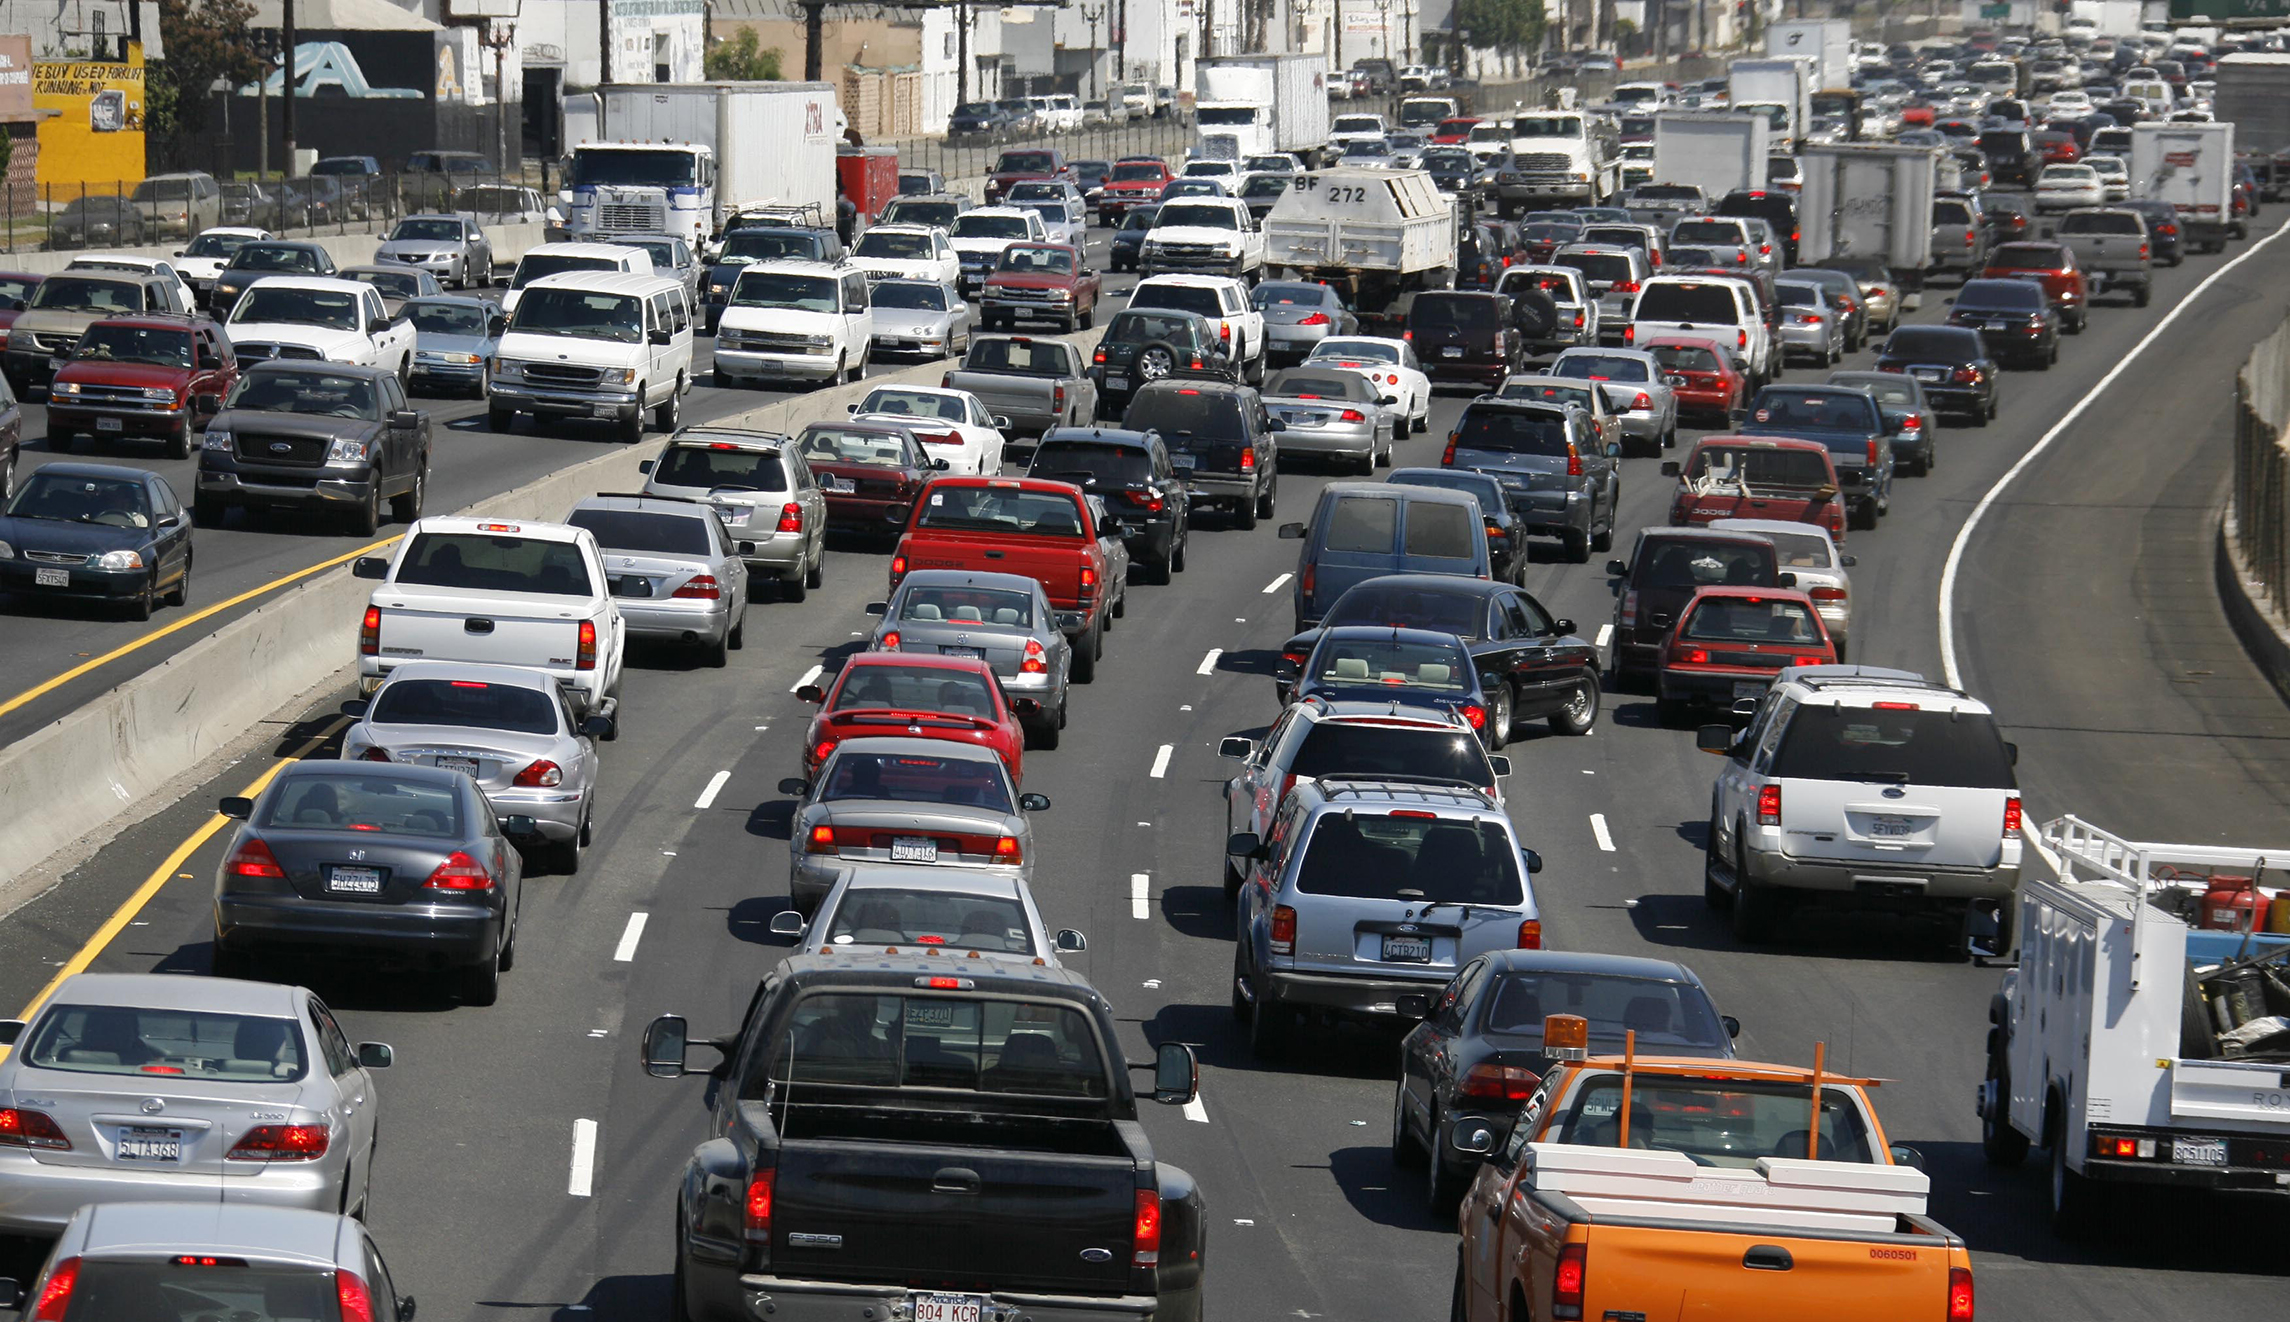 Southbound traffic on Interstate 5 moves through Los Angeles, Sept. 1, 2006. Oral arguments were scheduled Friday Sept. 15, 2006, in a U.S. District Court regarding California's requirement that automakers reduce emissions. At issue is whether California has the right under the federal Clean Air Act to regulate greenhouse gas emissions through tailpipe standards.